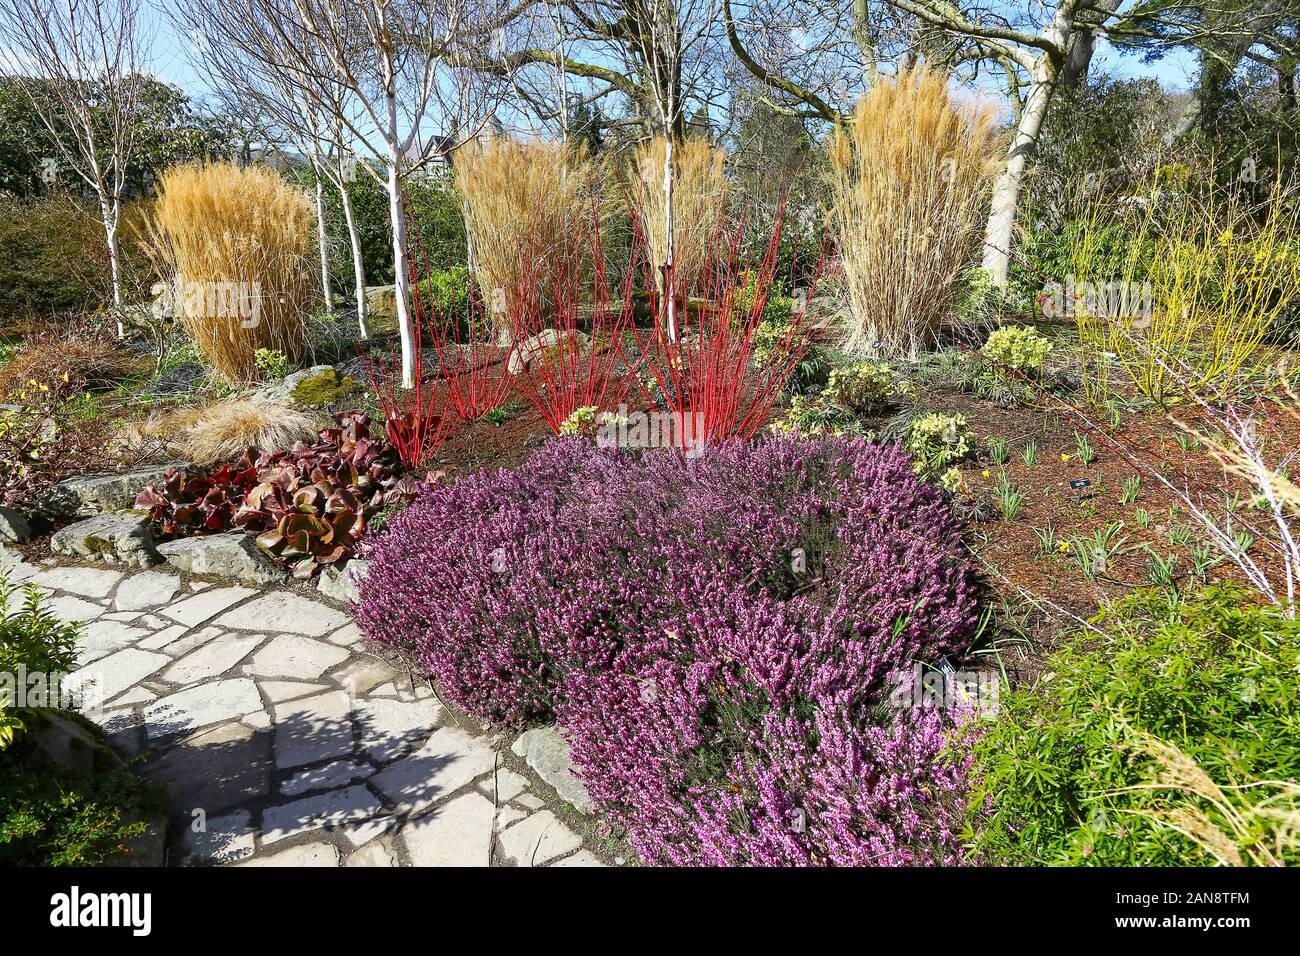 Heathers and ornamental grasses in the winter garden, Bodnant Gardens, Tal-y-Cafn, Conwy, Wales, UK Stock Photo